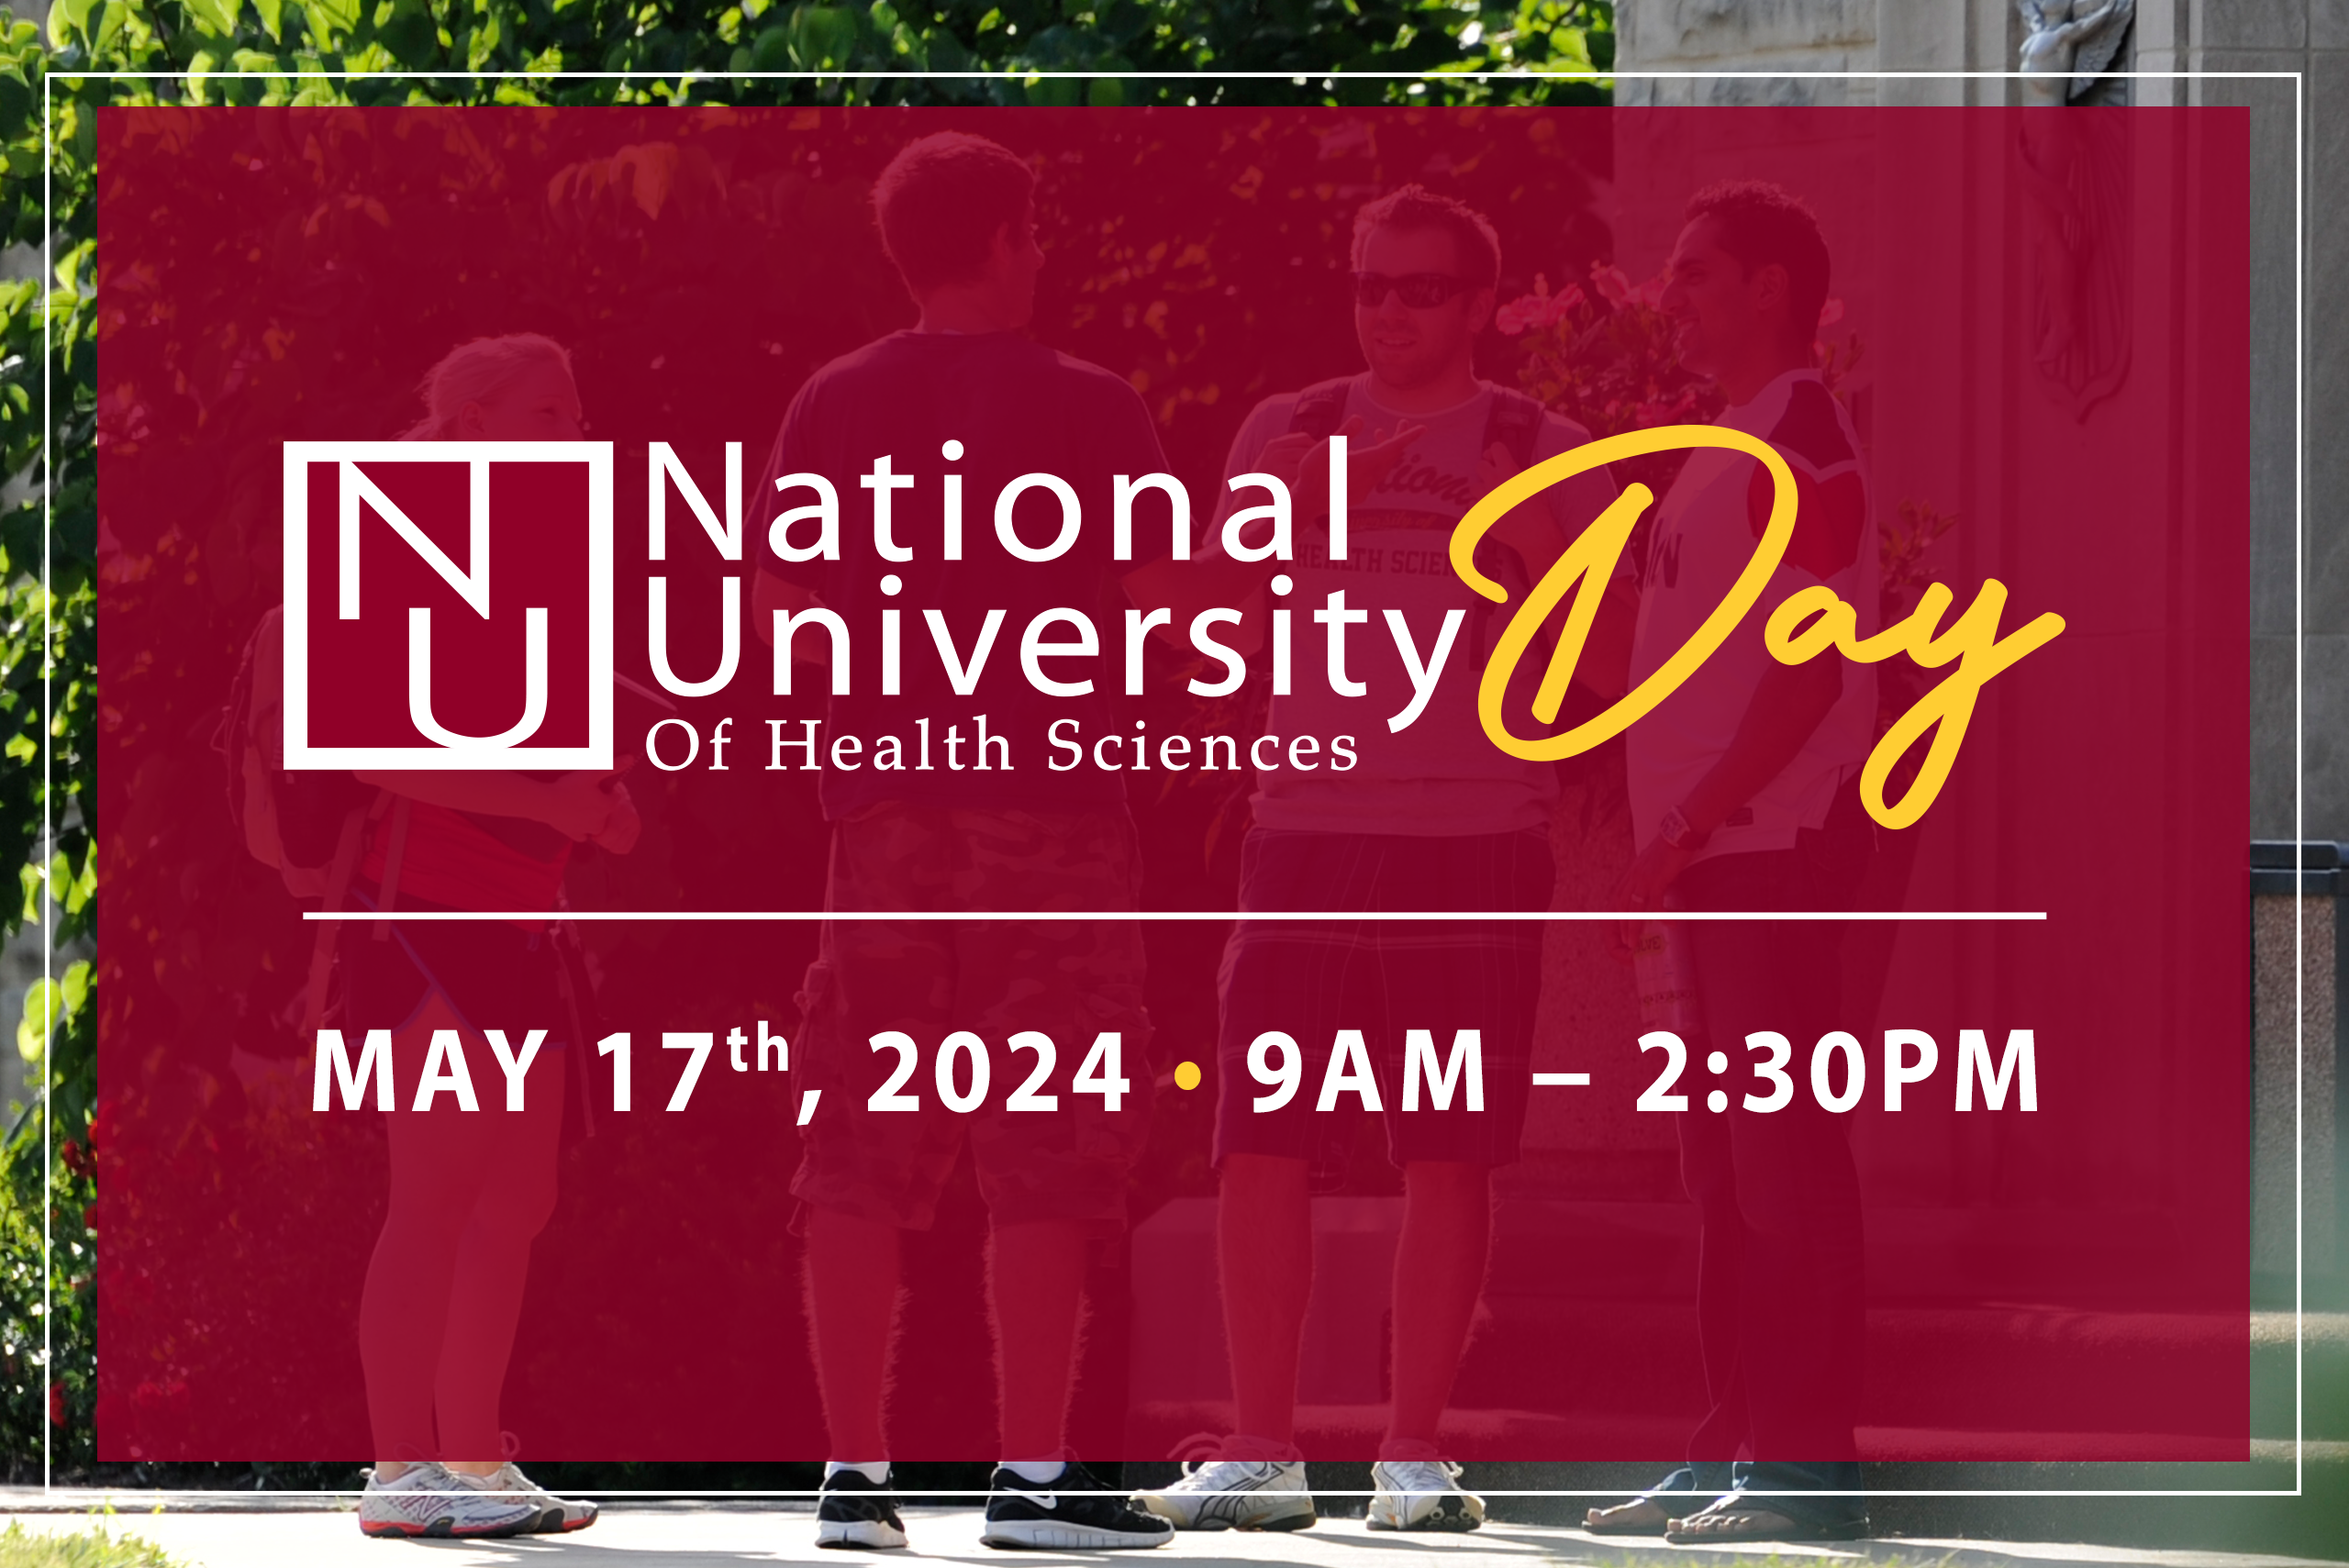 NUHS Day May 17th, 2024 9AM - 230PM